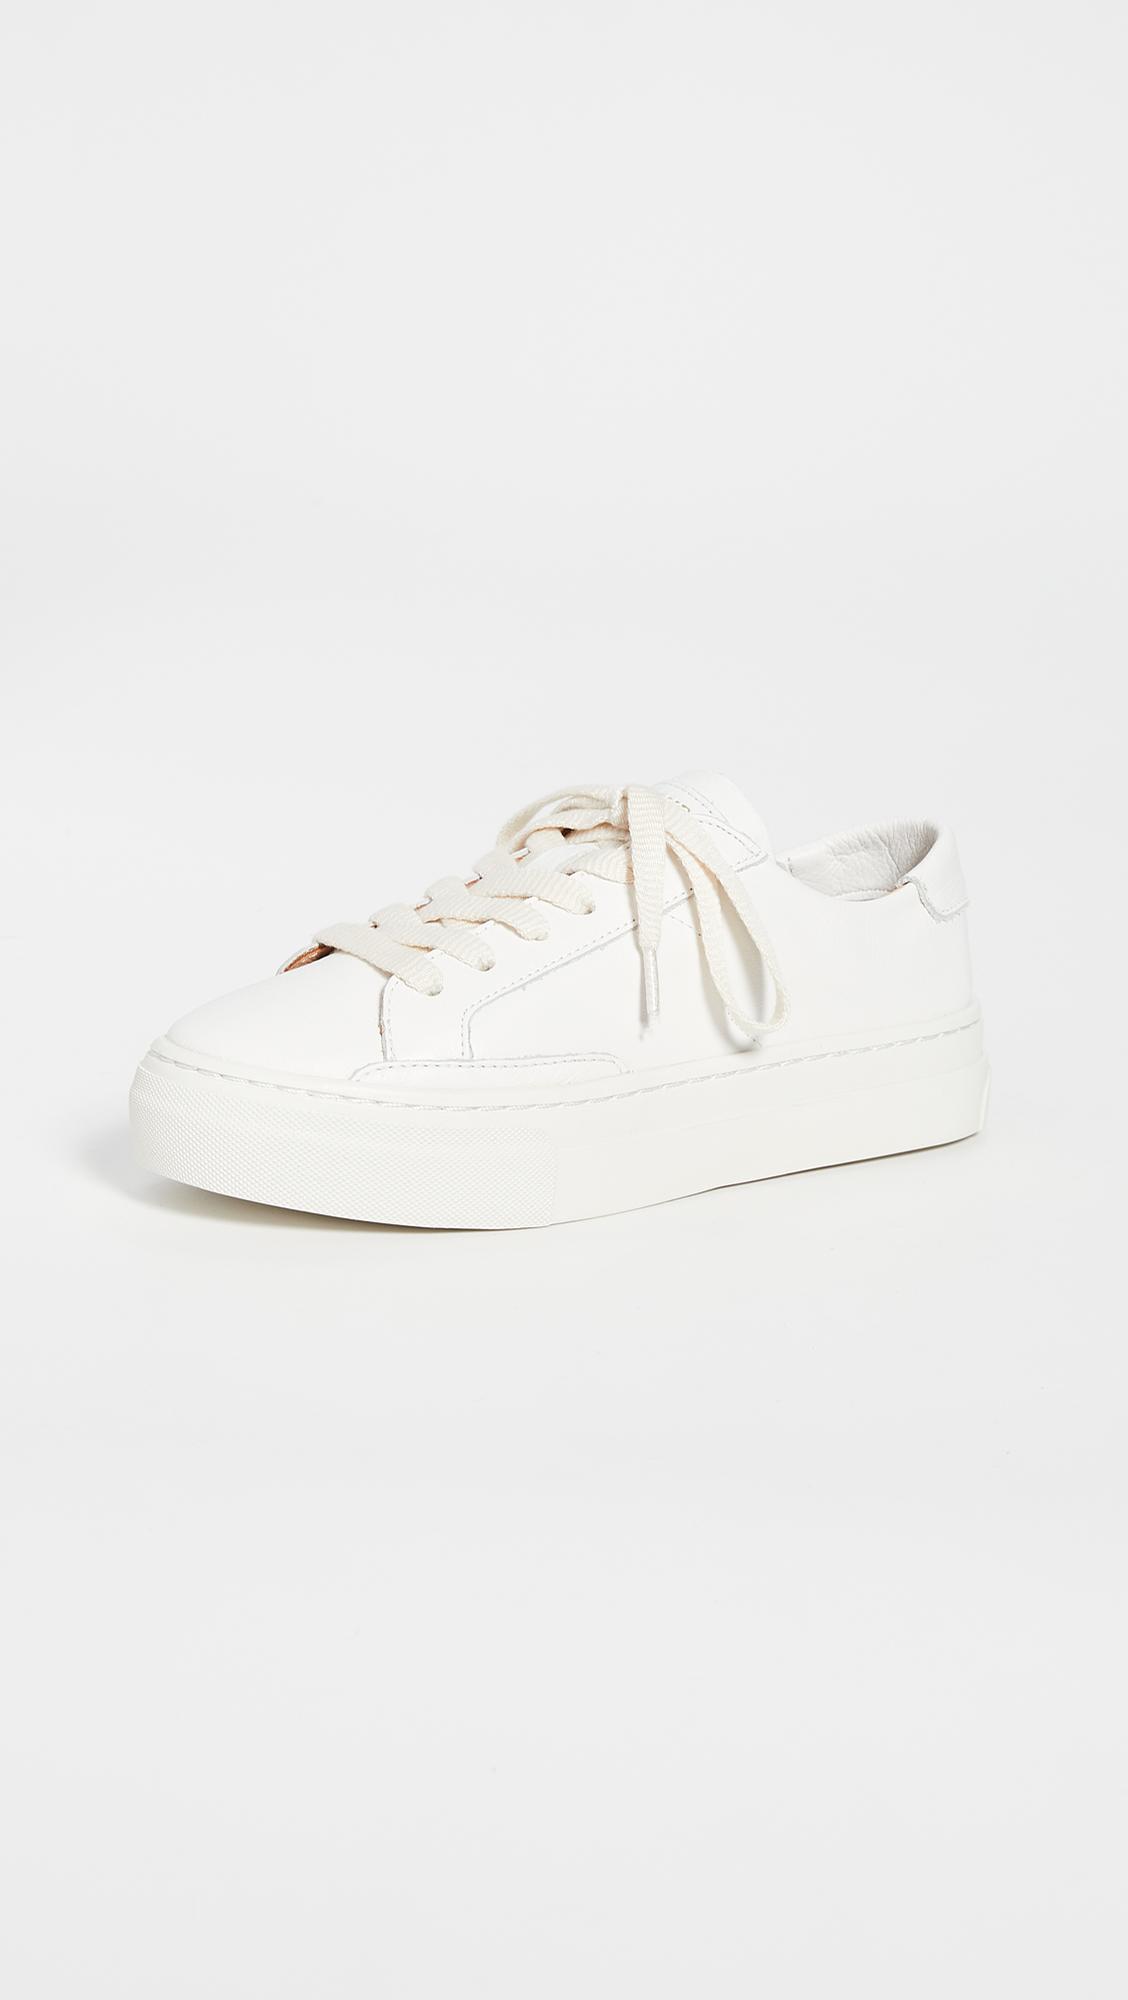 Soludos Leather Ibiza Platform Sneakers in White - Lyst